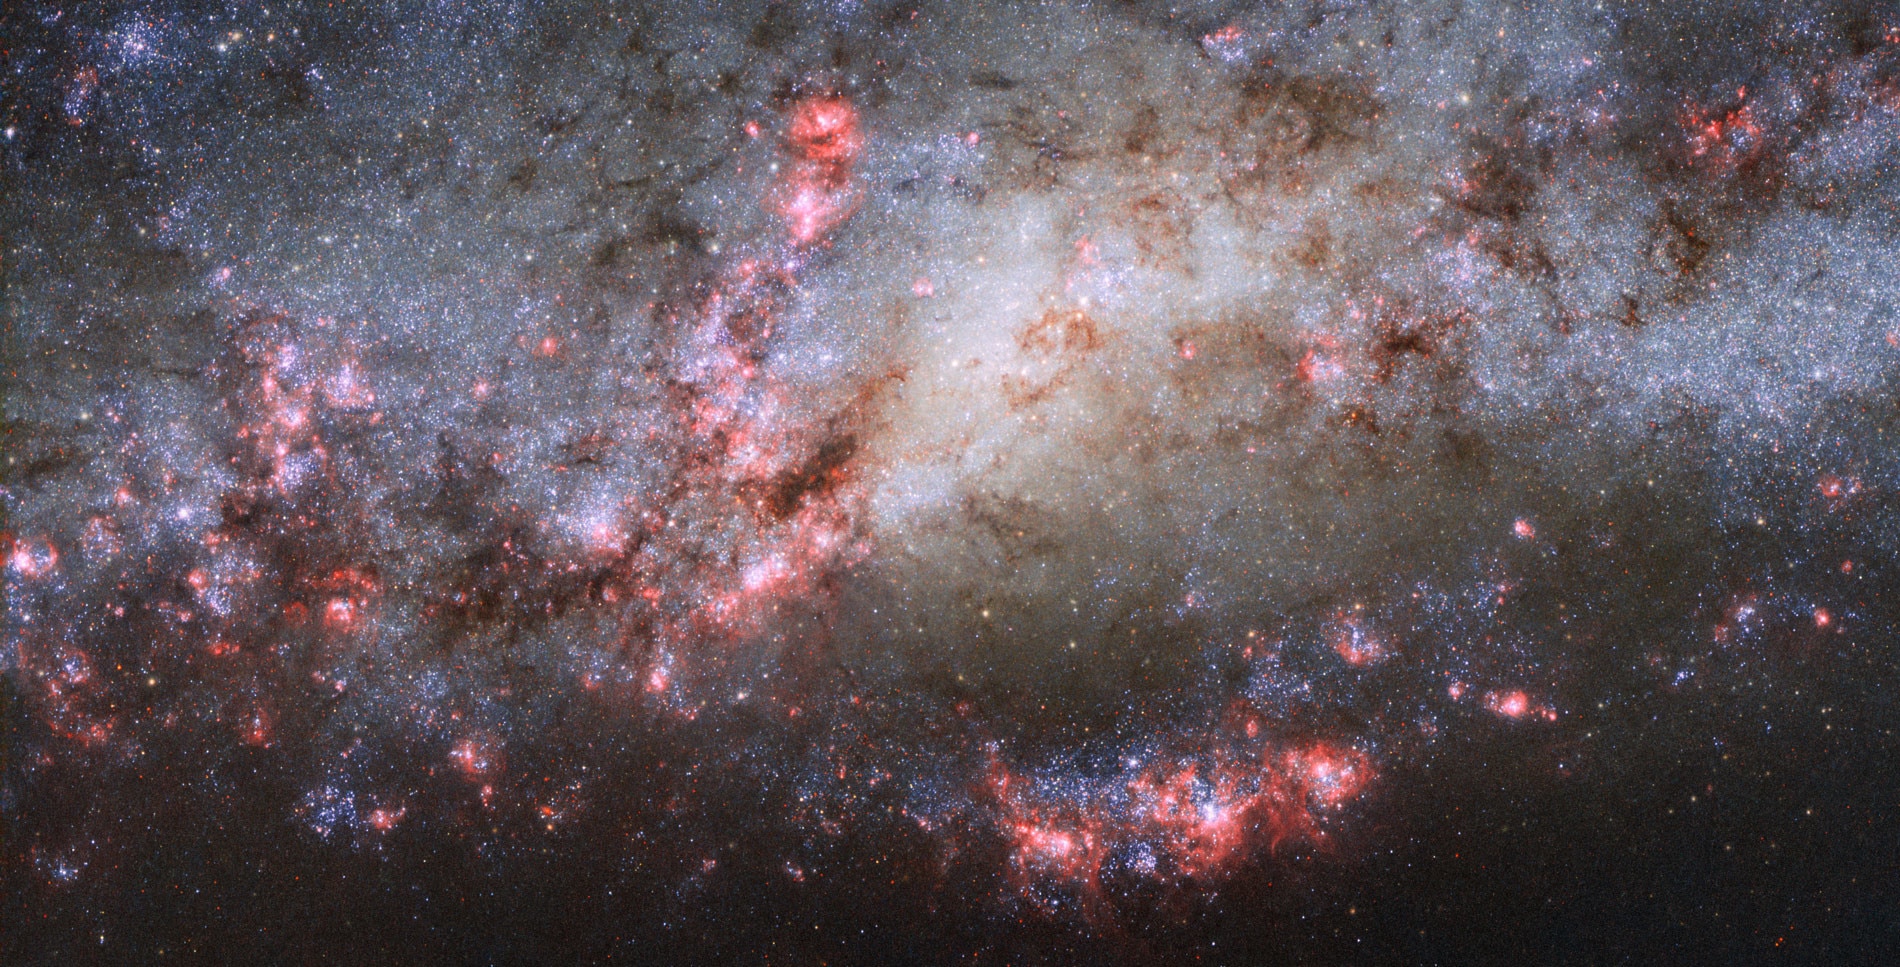 NGC 4490, a galaxy bursting with star formation after a recent close encounter with a smaller galaxy. Credit:  ESA/Hubble & NASA Acknowledgements: D. Calzetti (UMass) and the LEGUS Team, J. Maund (University of Sheffield), and R. Chandar (University of To